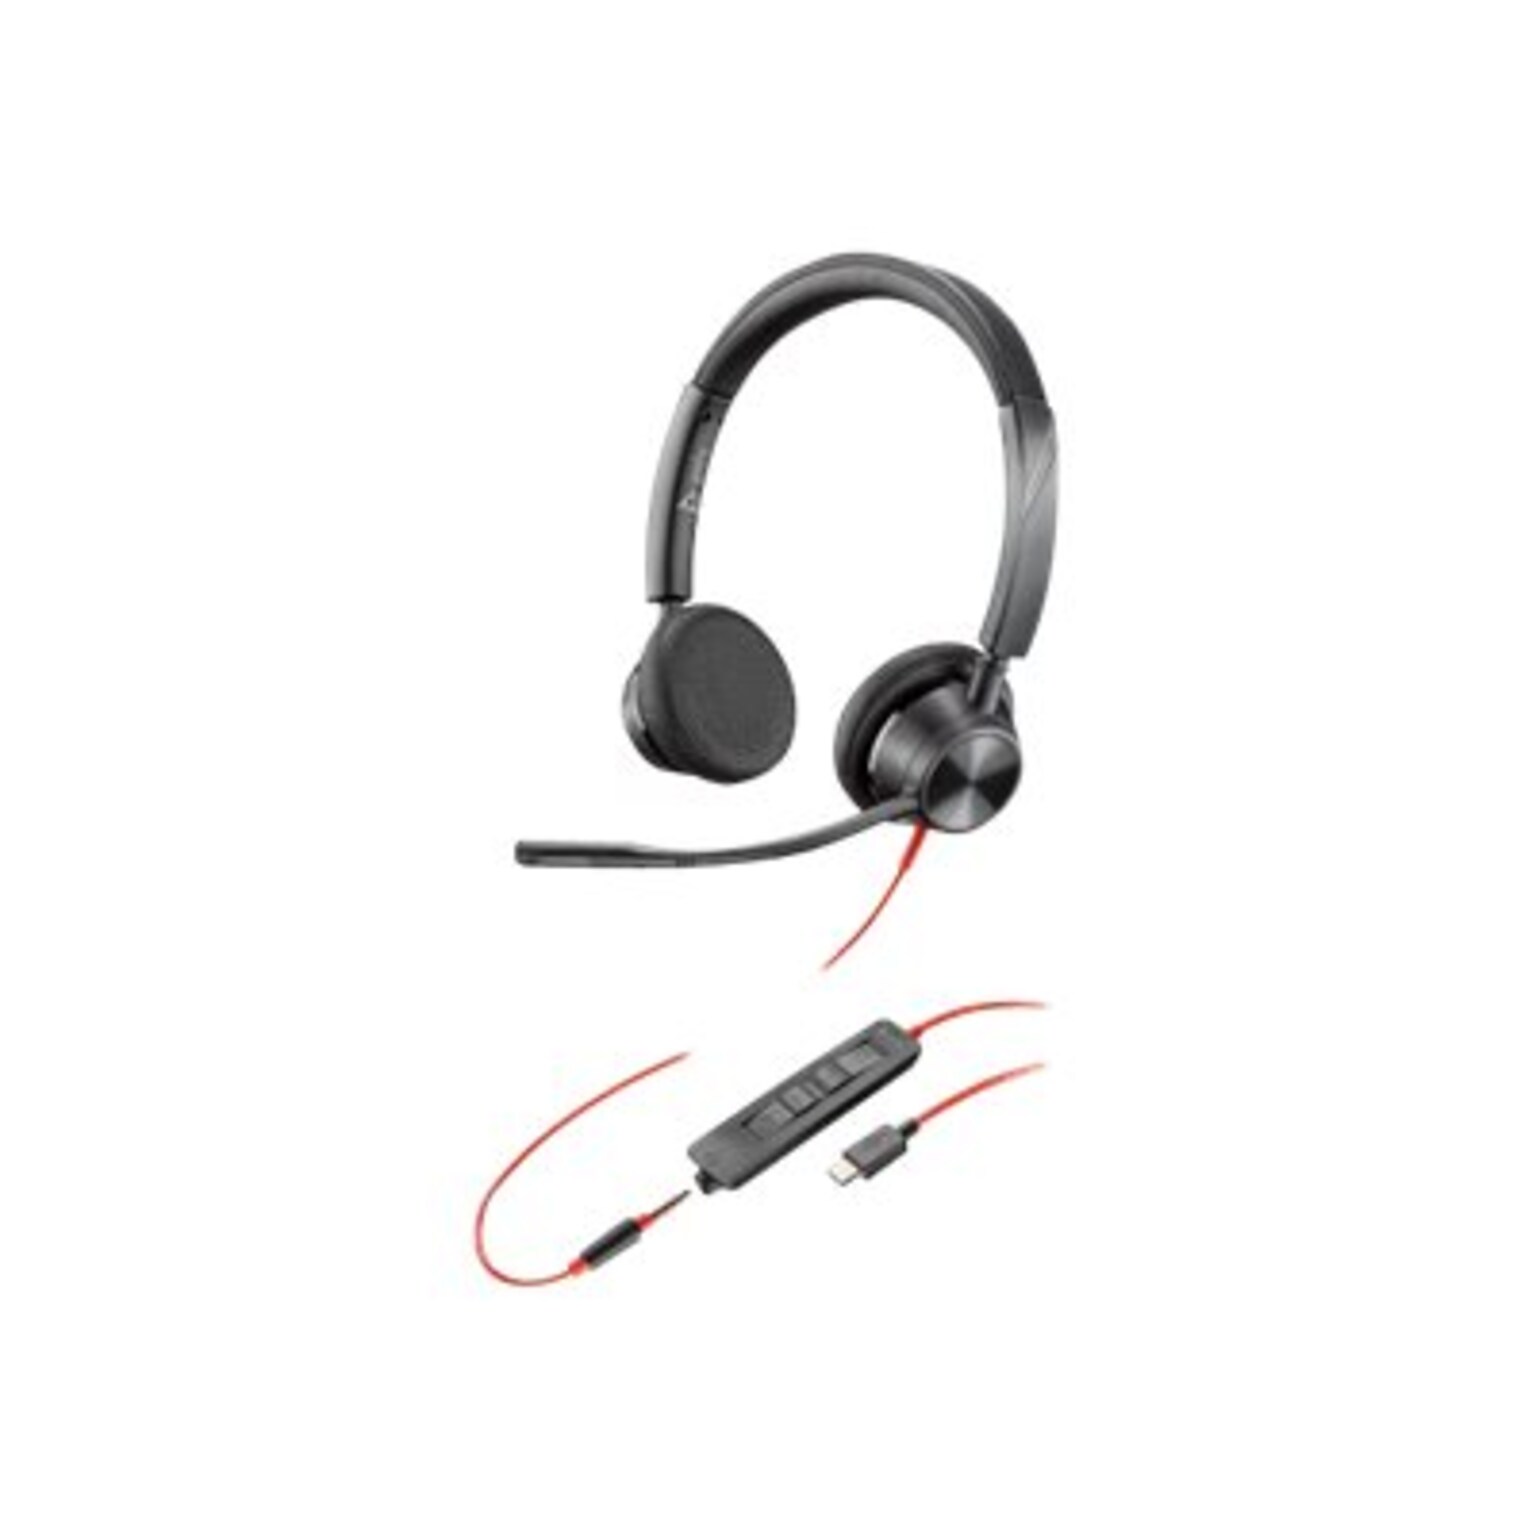 Plantronics Blackwire 3325 Wired Stereo On Ear Computer Headset, Black (213939-01)